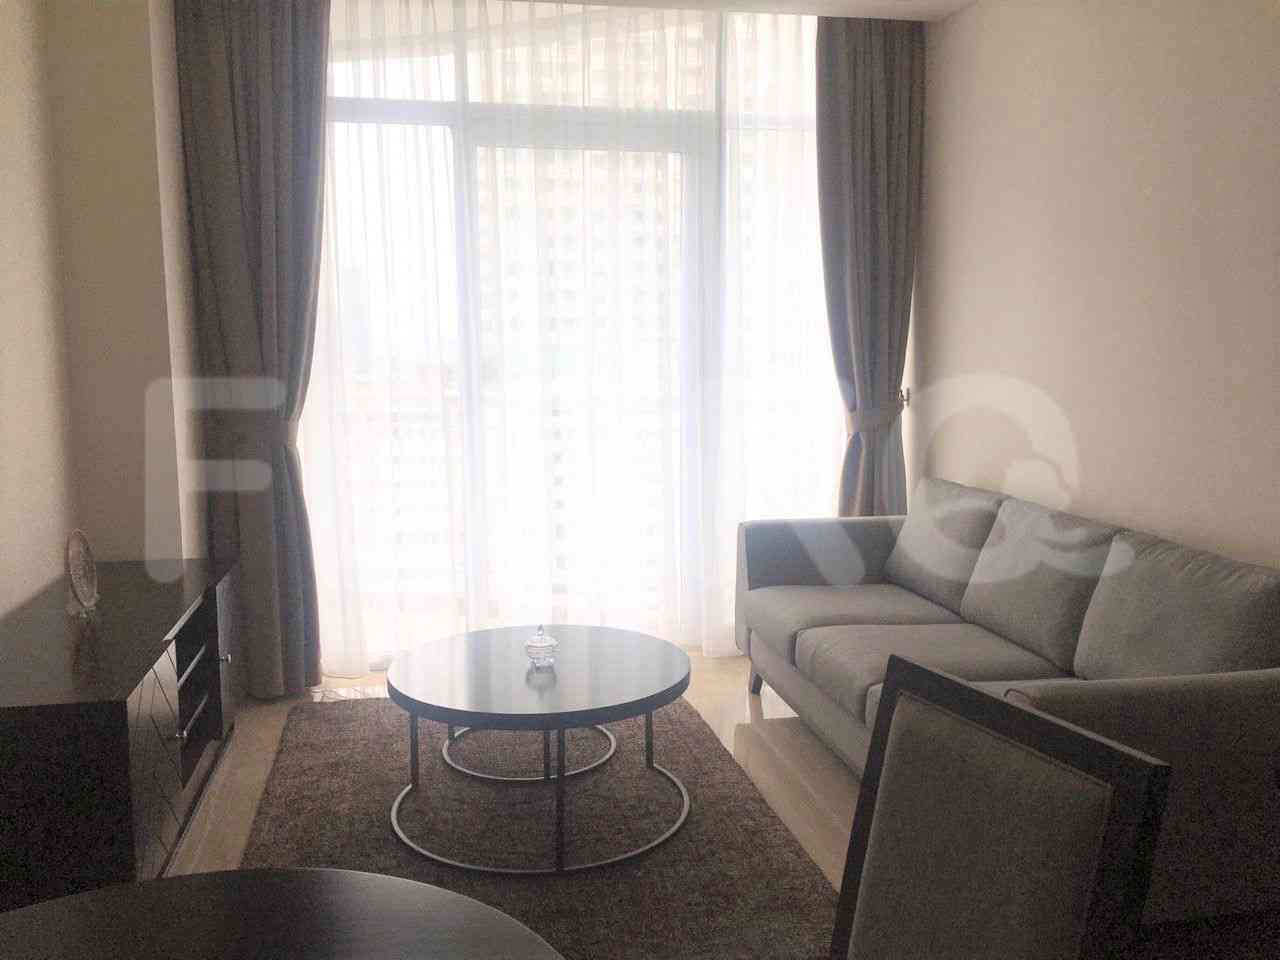 2 Bedroom on 17th Floor for Rent in South Hills Apartment - fku14d 1